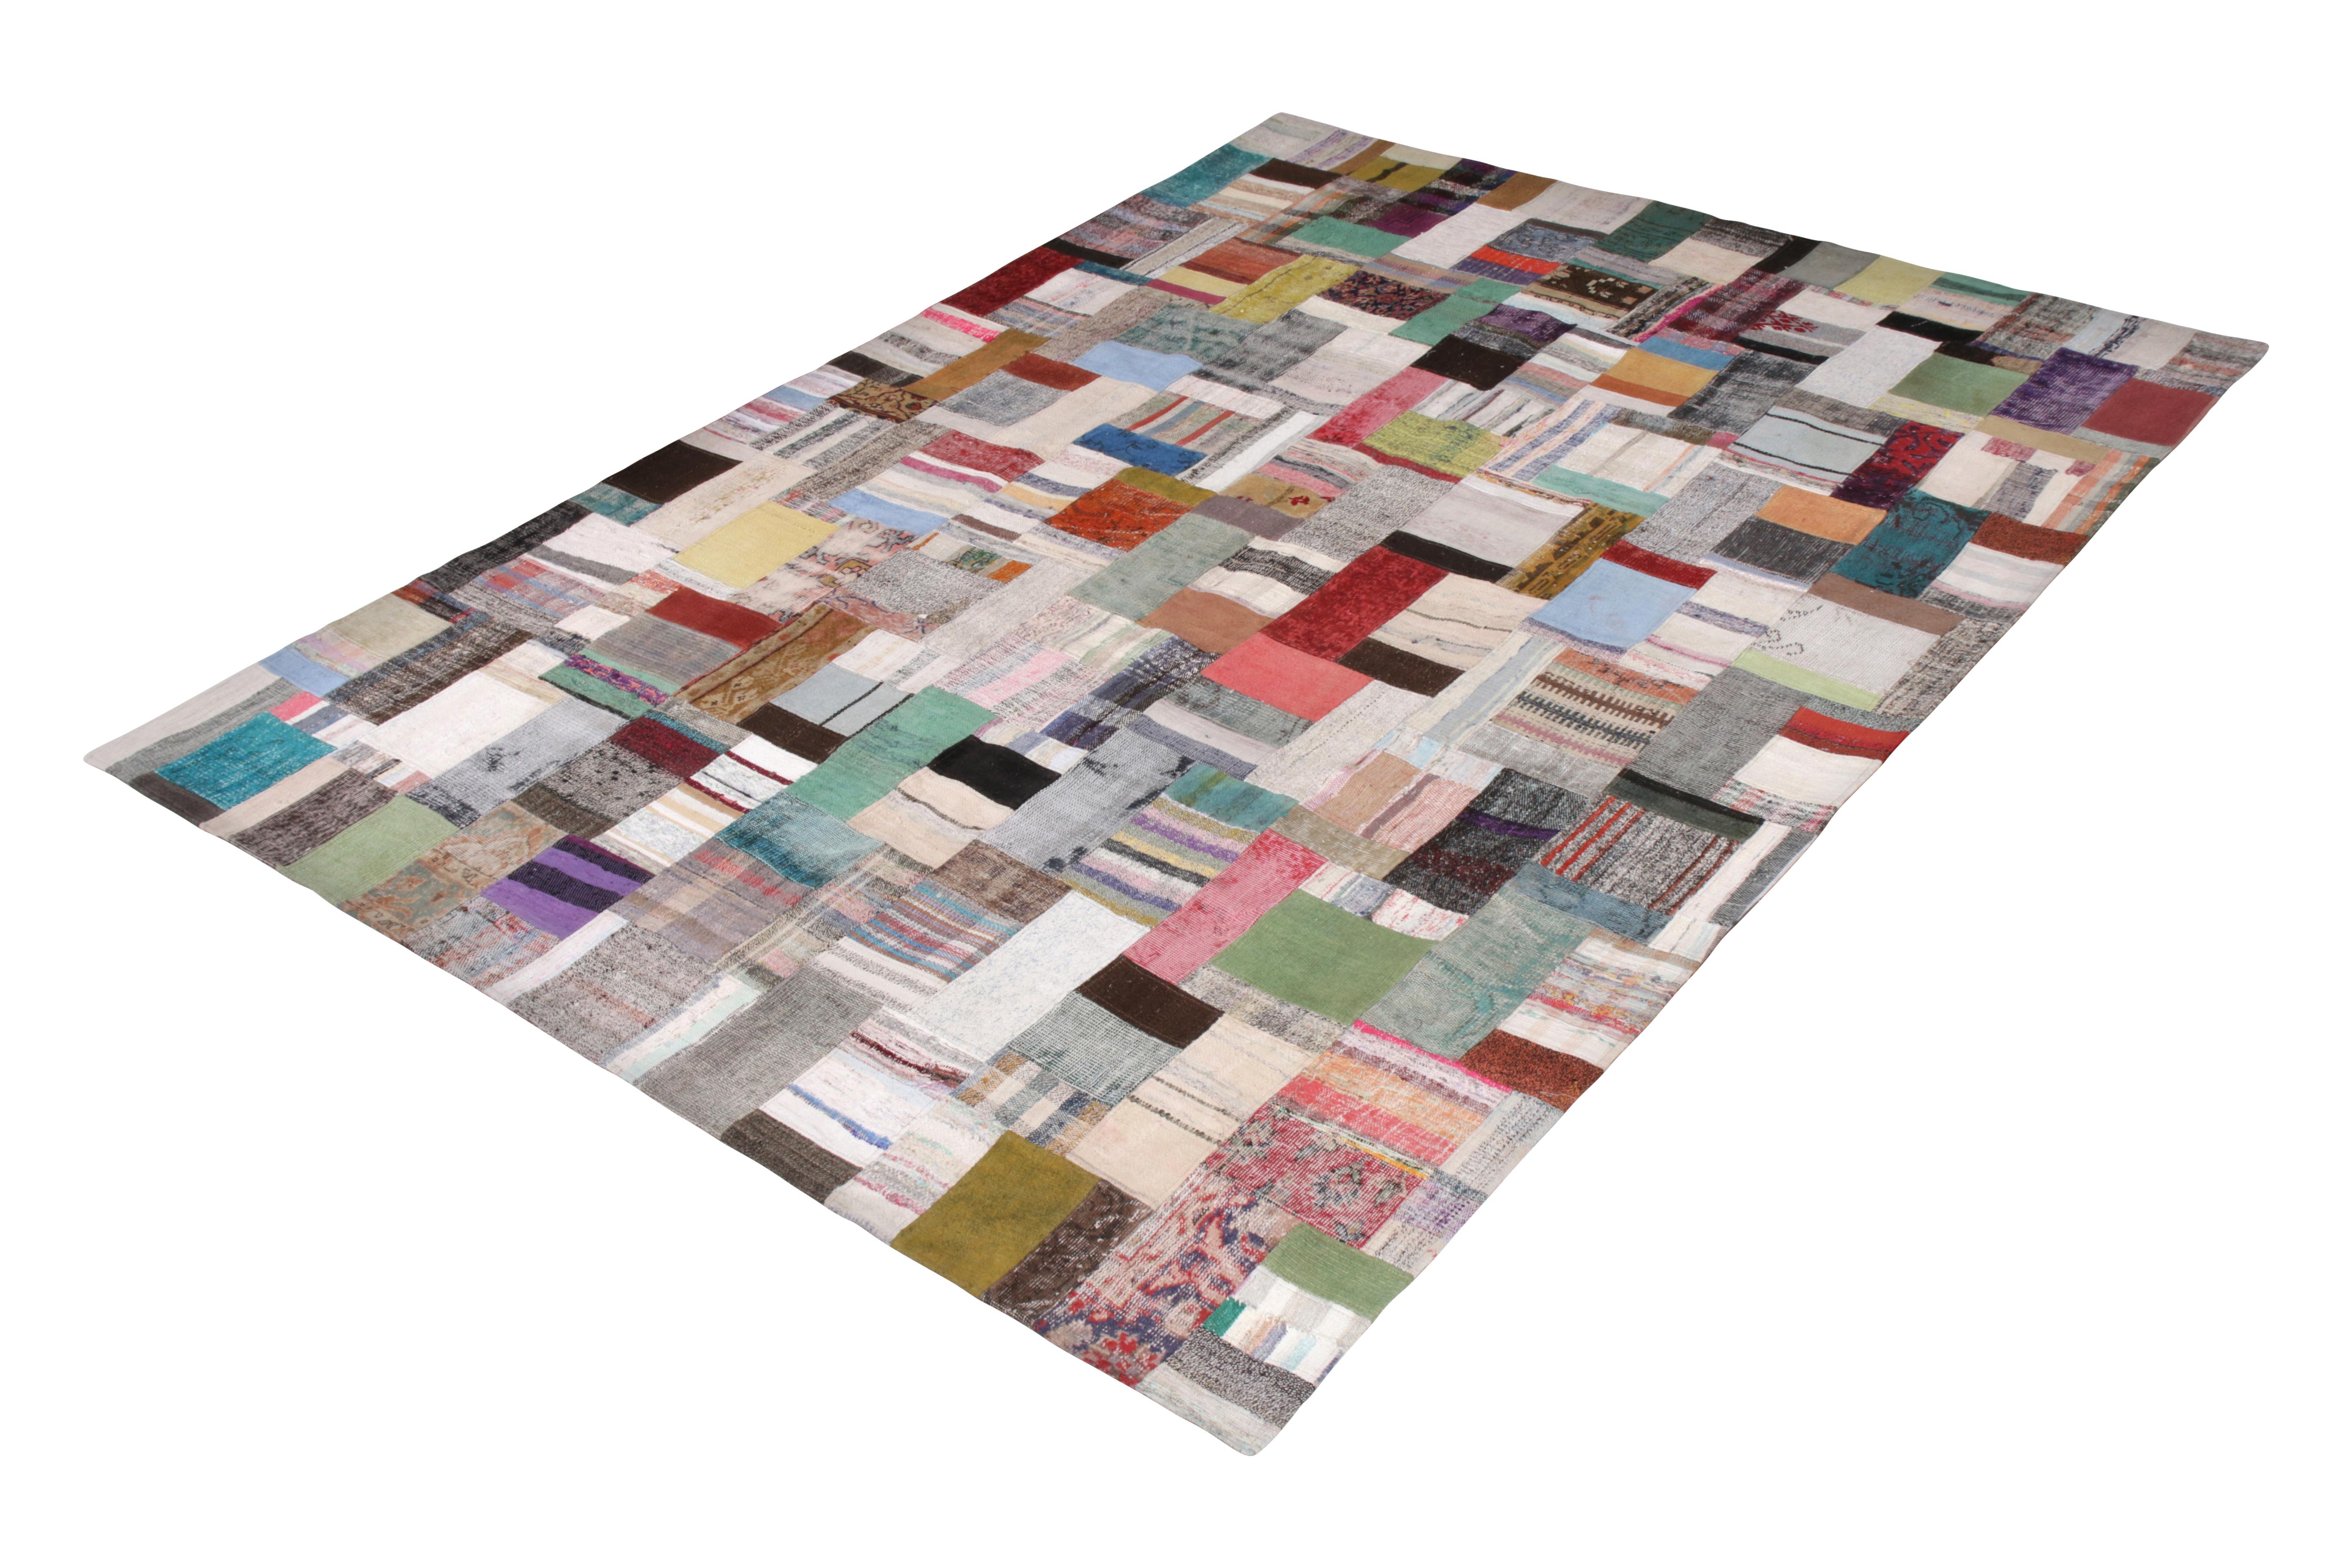 Handwoven in a wool flat-weave utilizing vintage yarns, this modern Kilim rug from Rug & Kilim’s Patchwork Kilim rug collection marries inspiration from midcentury Kilim rugs with a whimsical spectrum of red, blue, pink, green, and other colorways